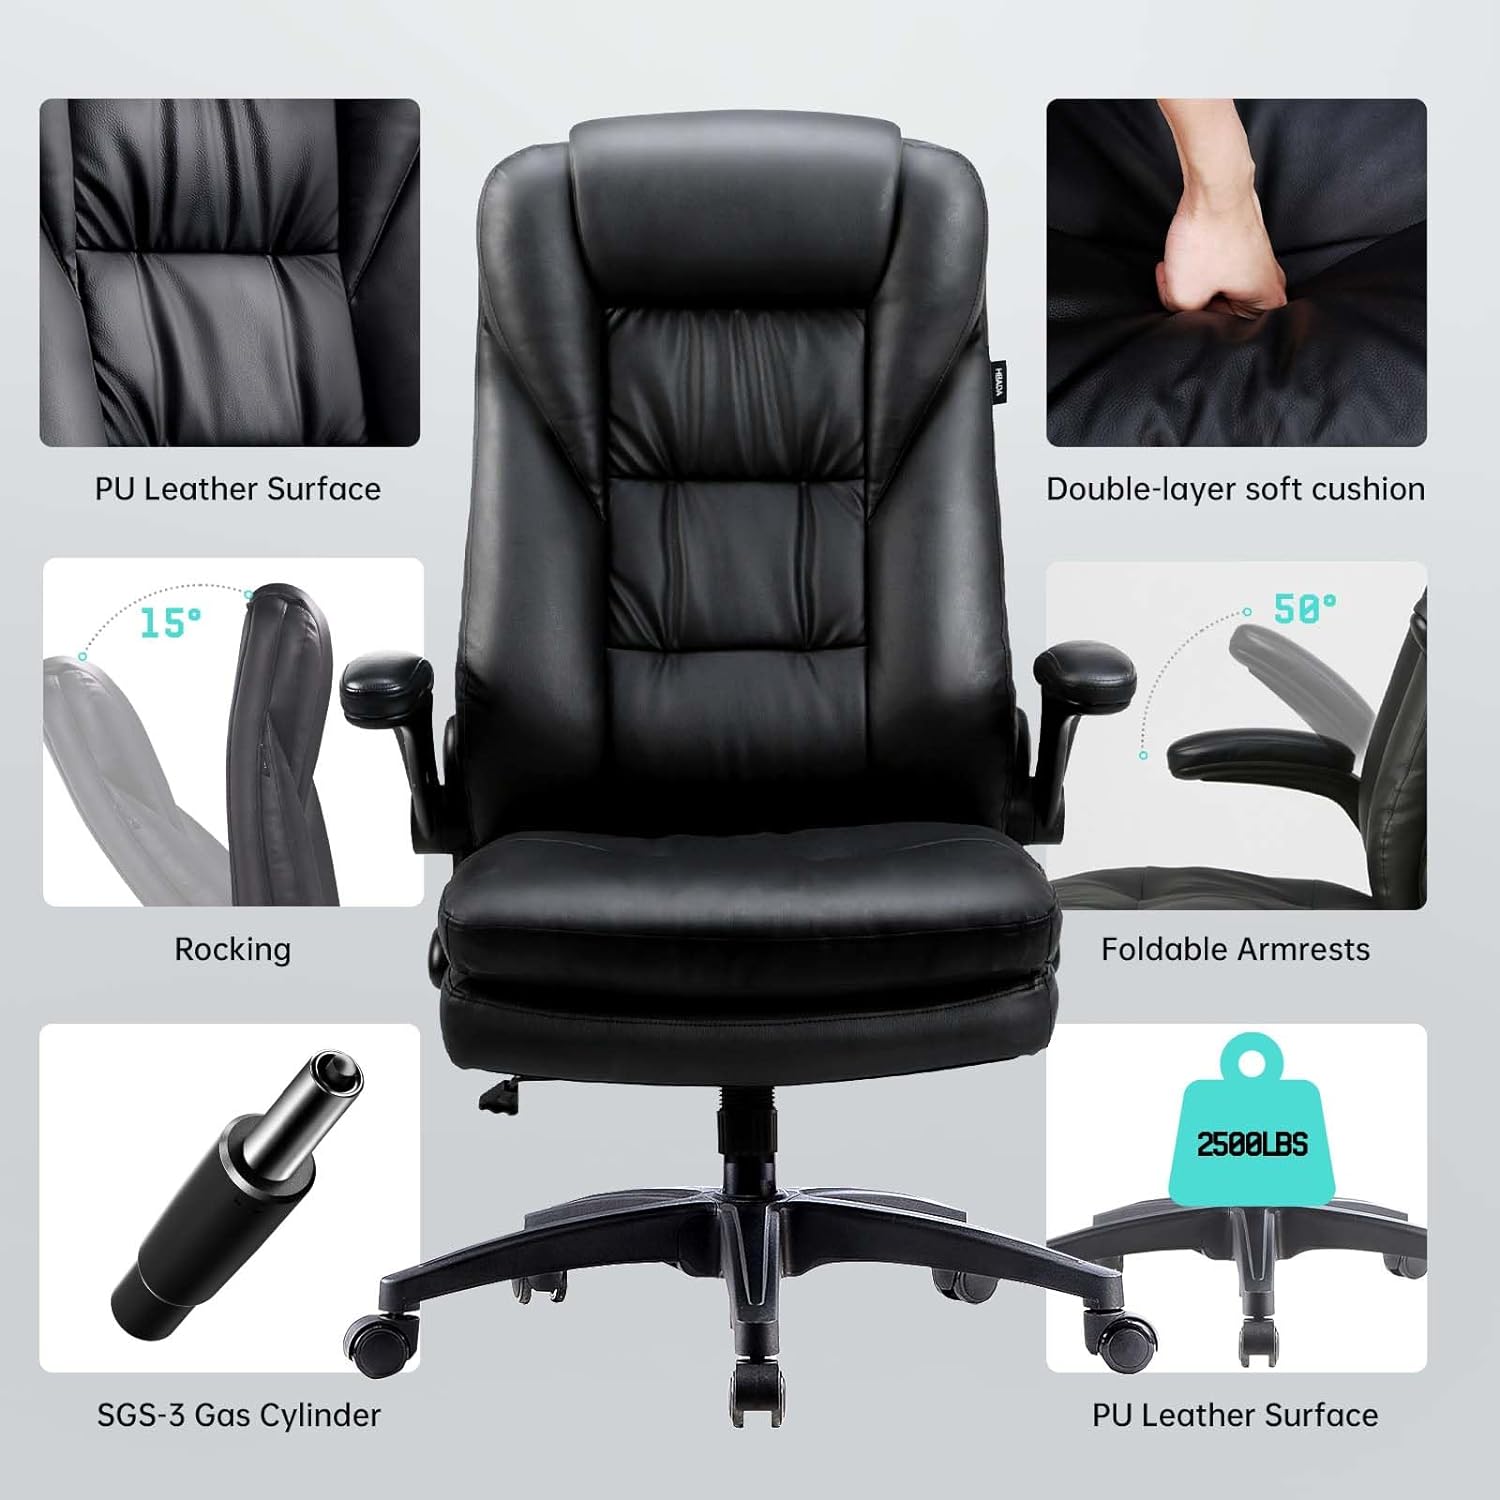 Hbada Executive Office Chair, Big and Tall Desk Chair 400lbs Wide Seat, High Back PU Leather Ergonomic Computer with Adjustable Armrest, 360° Swivel Height, Black